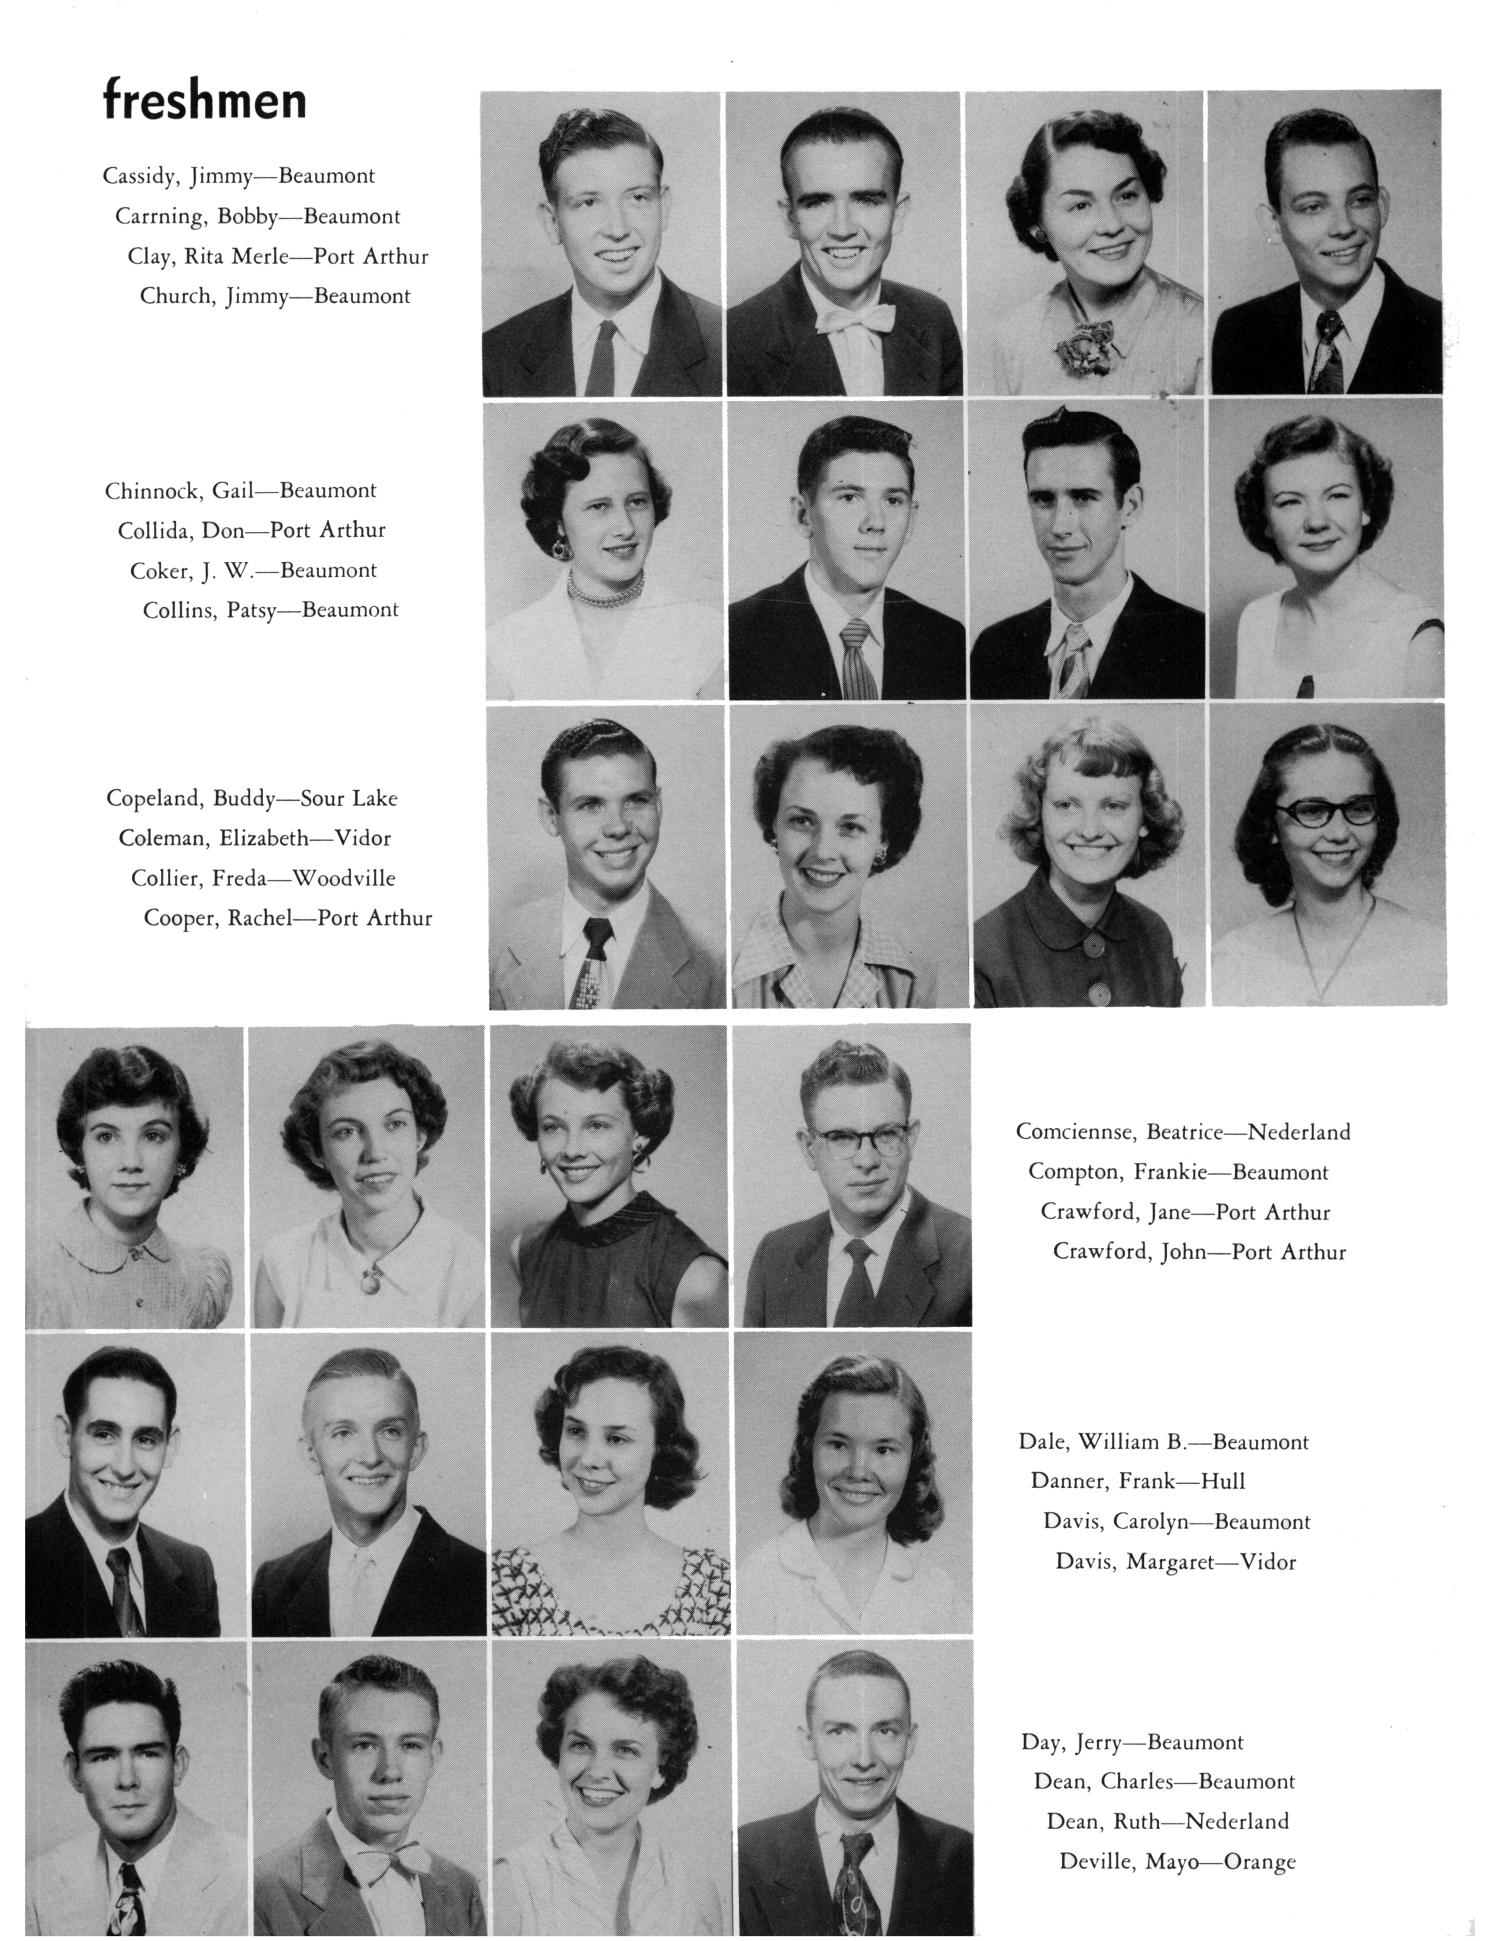 The Cardinal, Yearbook of Lamar State College of Technology, 1954
                                                
                                                    64
                                                